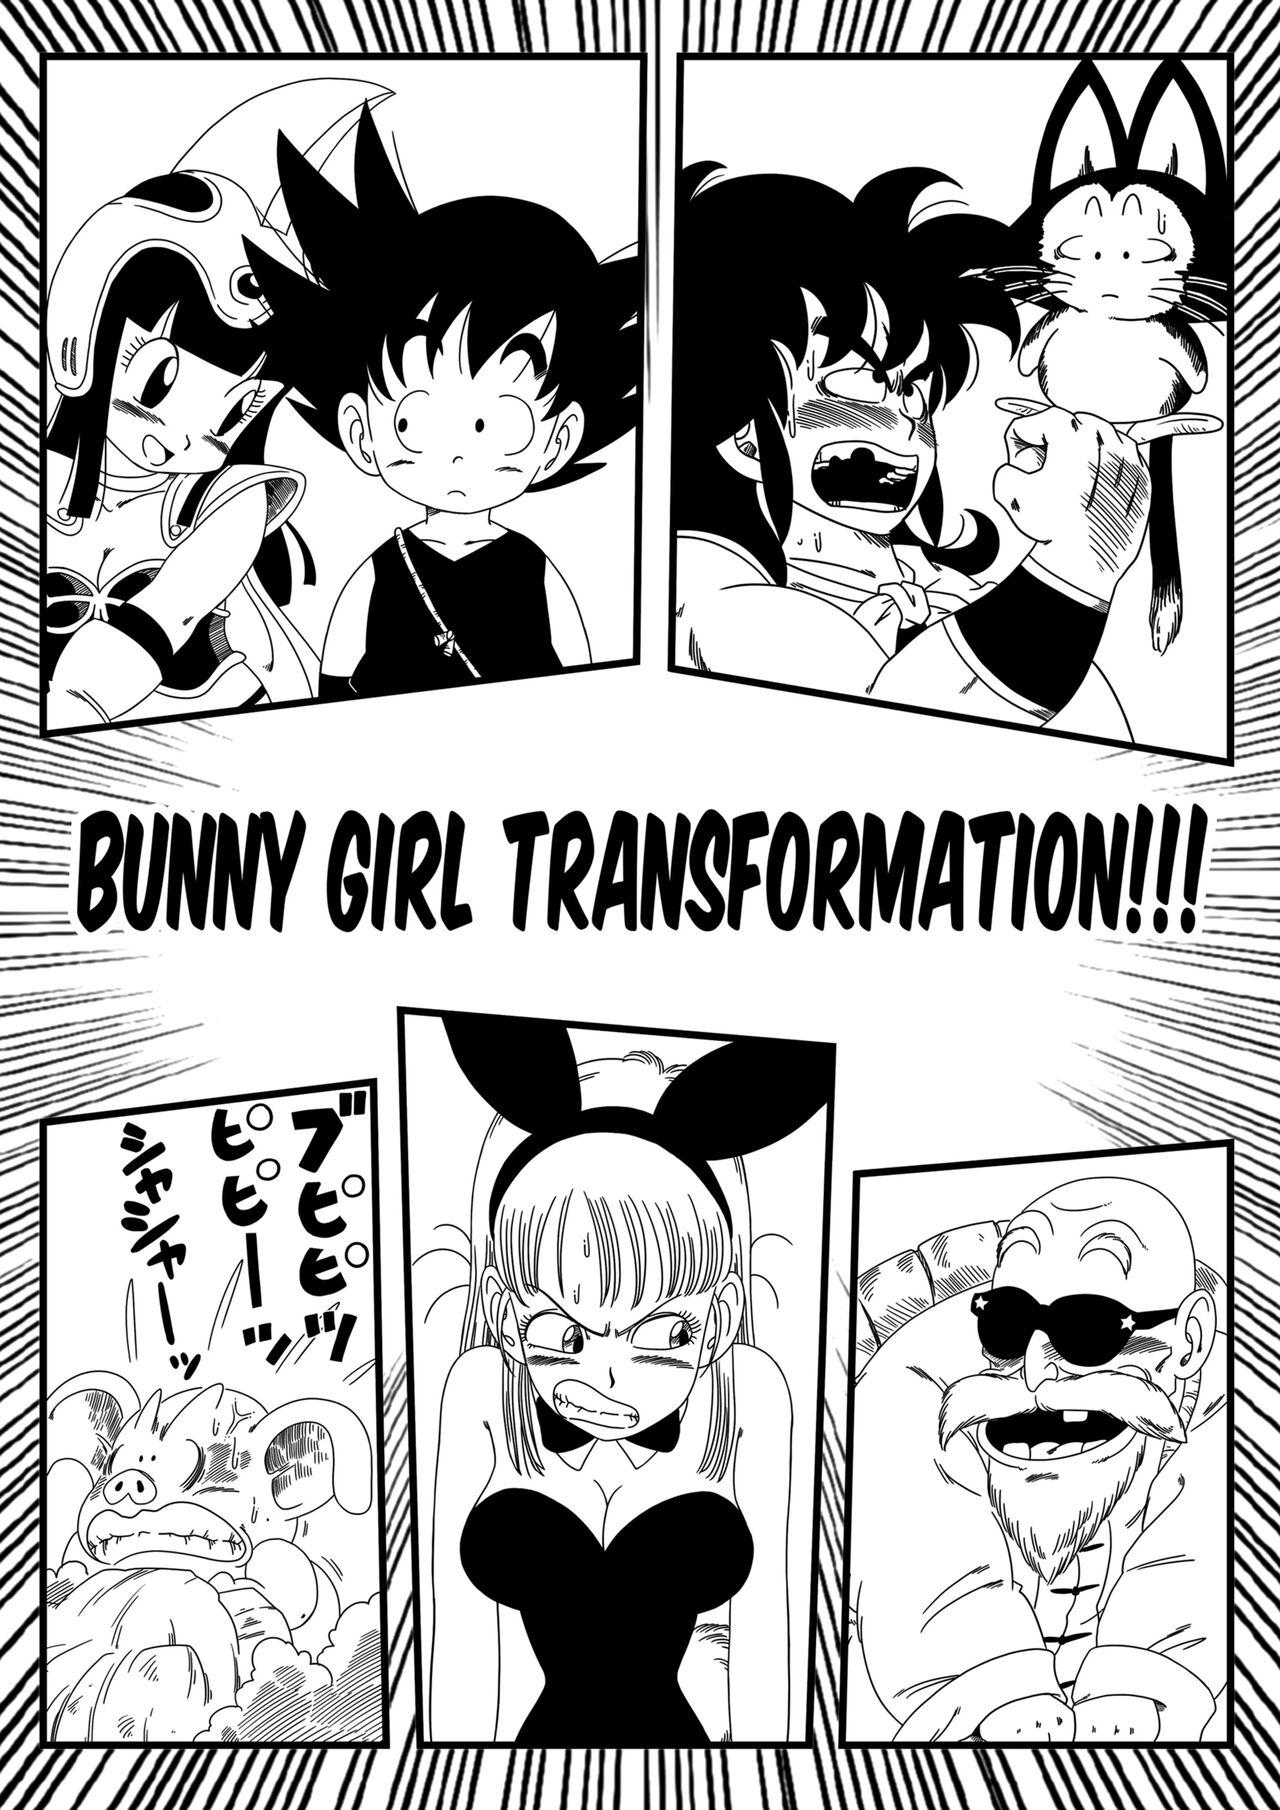 Young Bunny Girl Transformation Pussyeating - Picture 3